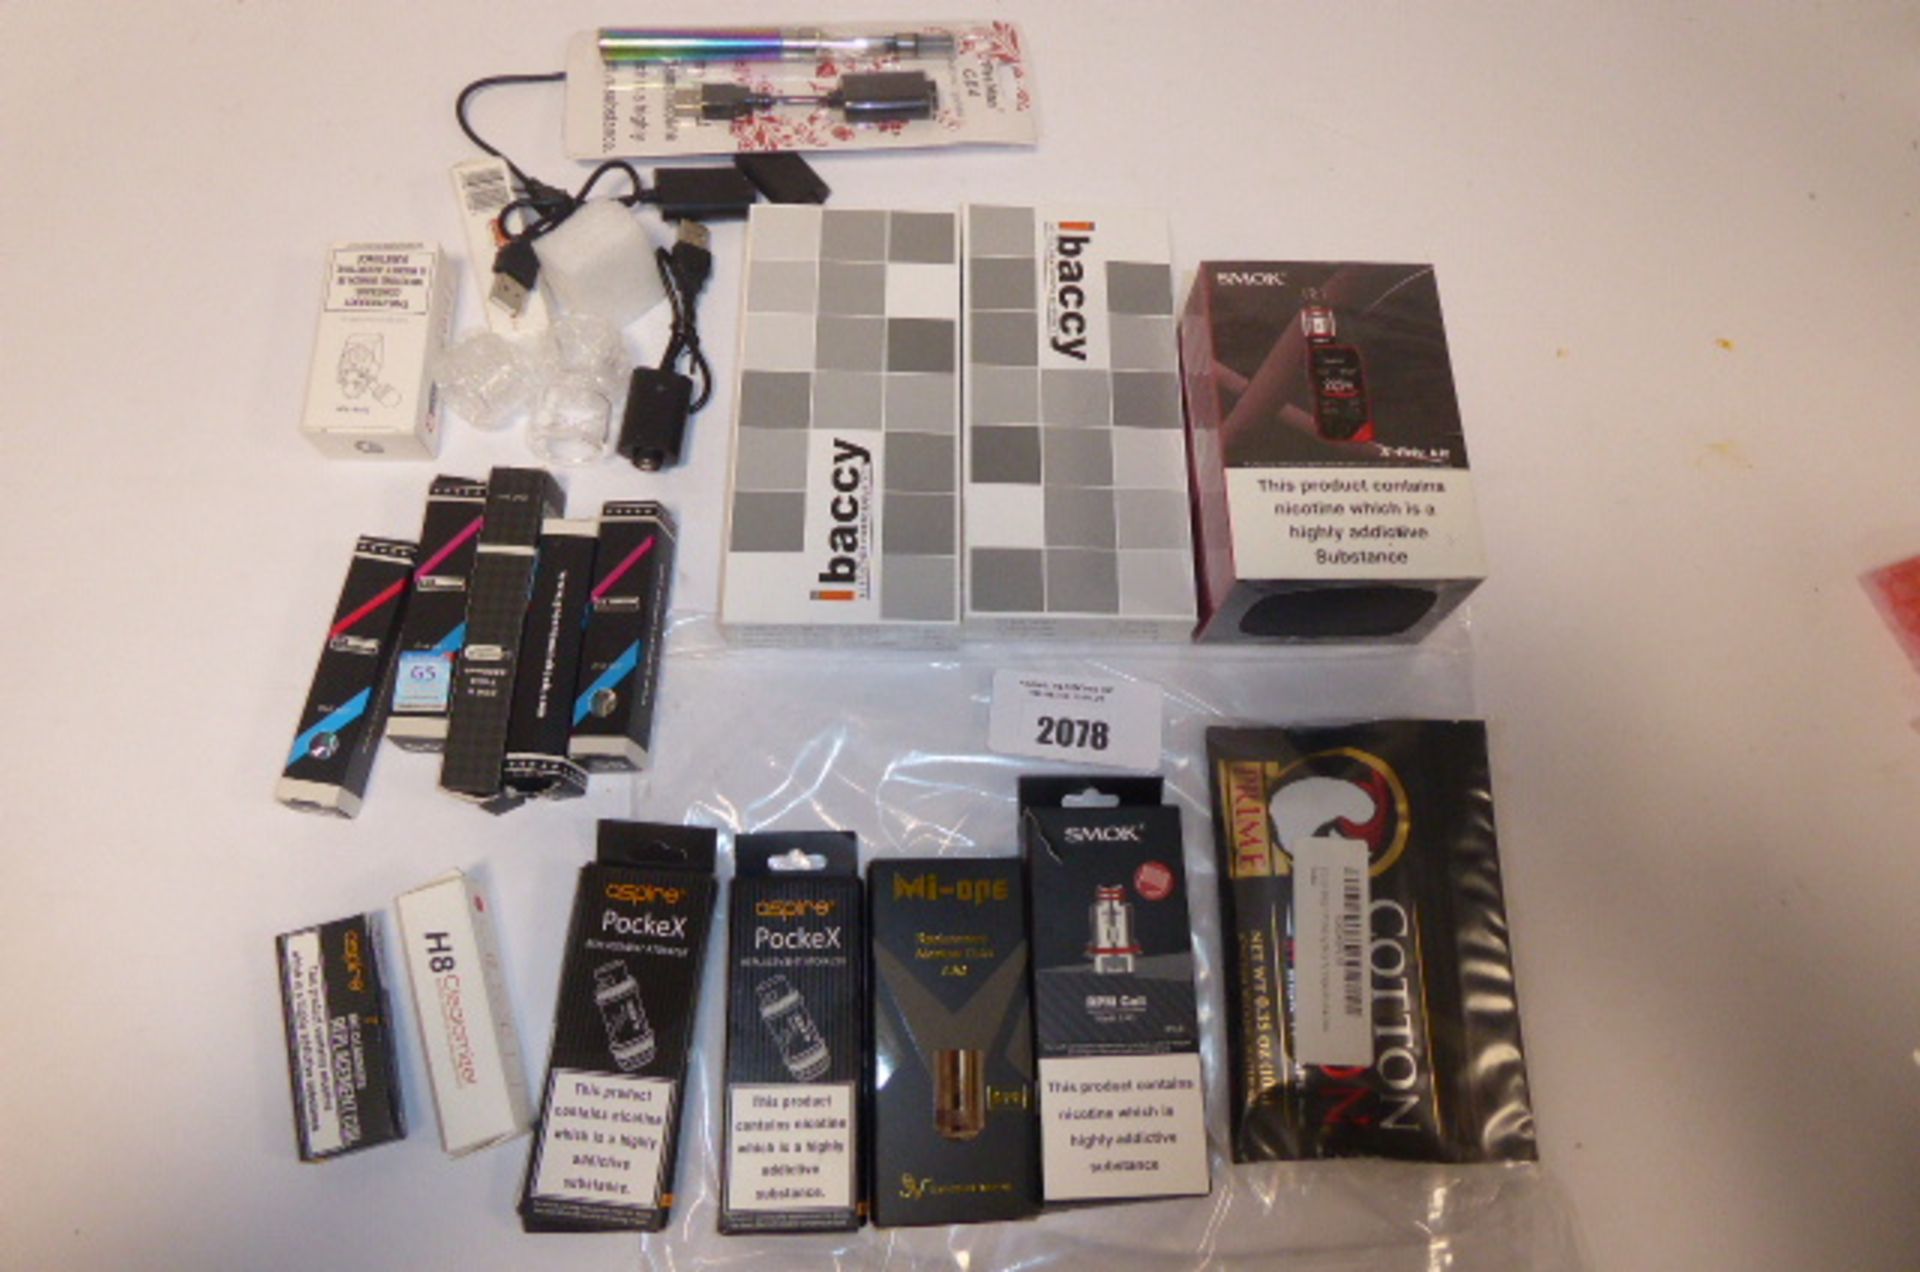 Bag containing Smok And other vaping kit accessories